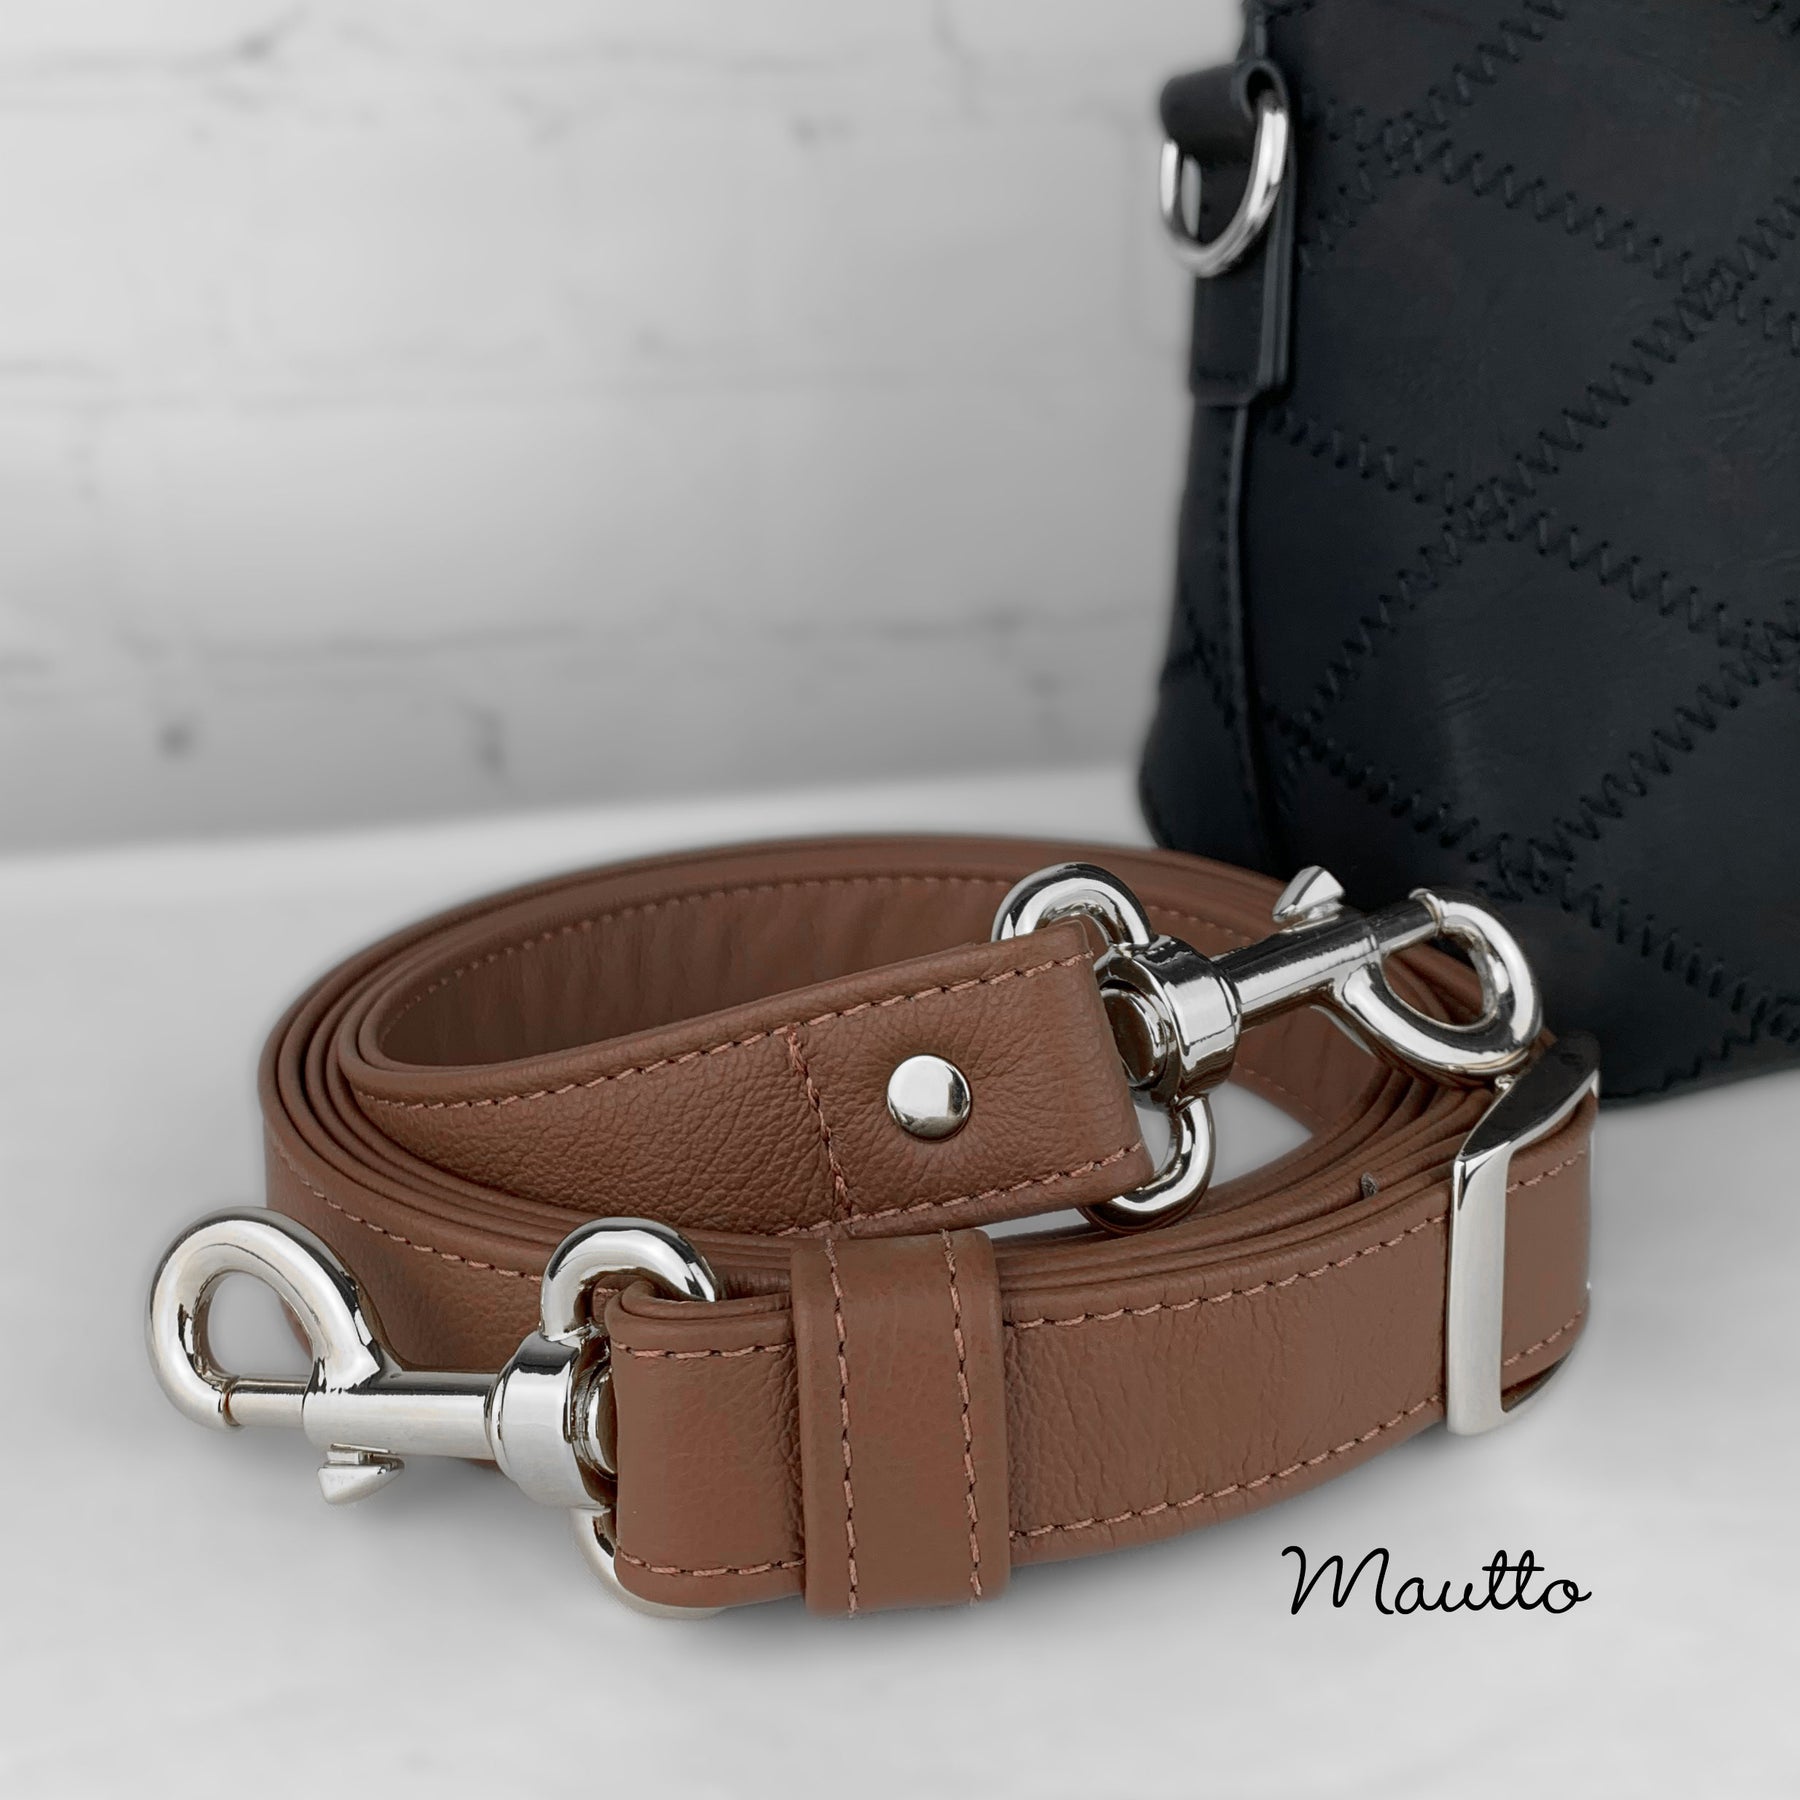 Mautto Adjustable Leather Crossbody Strap